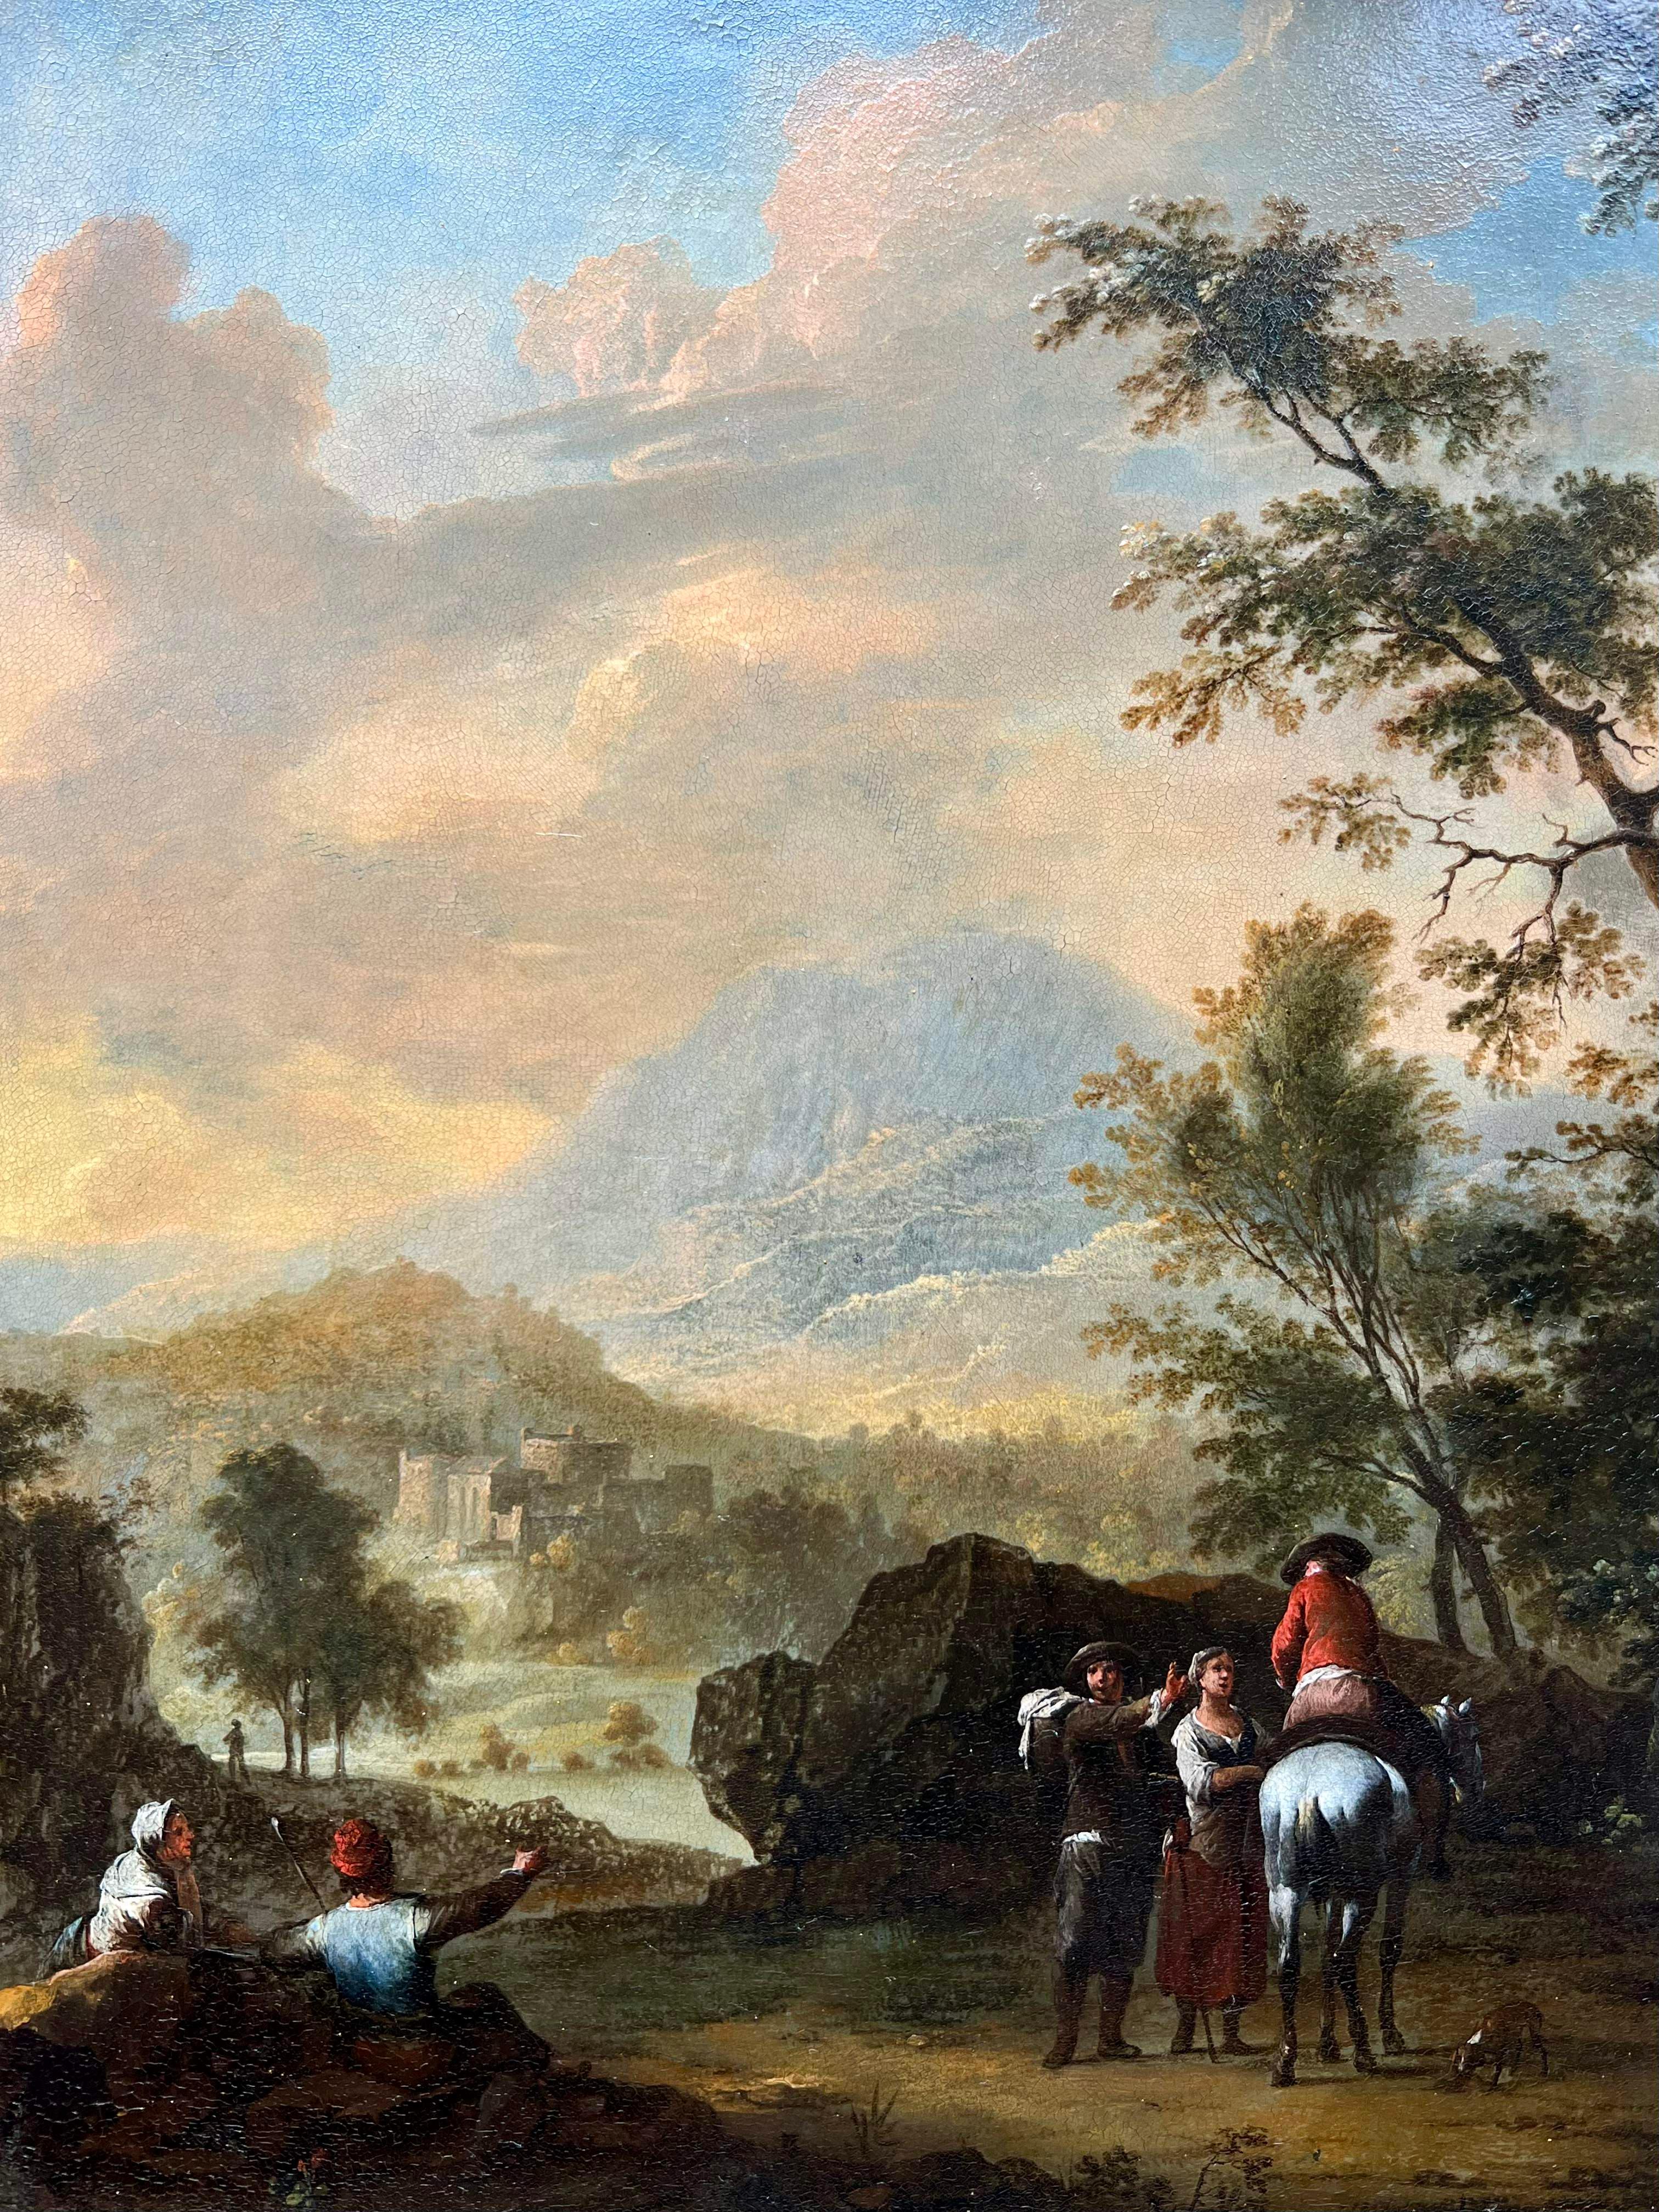 18th century old master painting depicting a peaceful countryside scenery at sunset with a fortified town visible in the distance attributed to Franz Paula de Ferg

In the present jewel-like painting, de Ferg captures a moment of respite amidst the